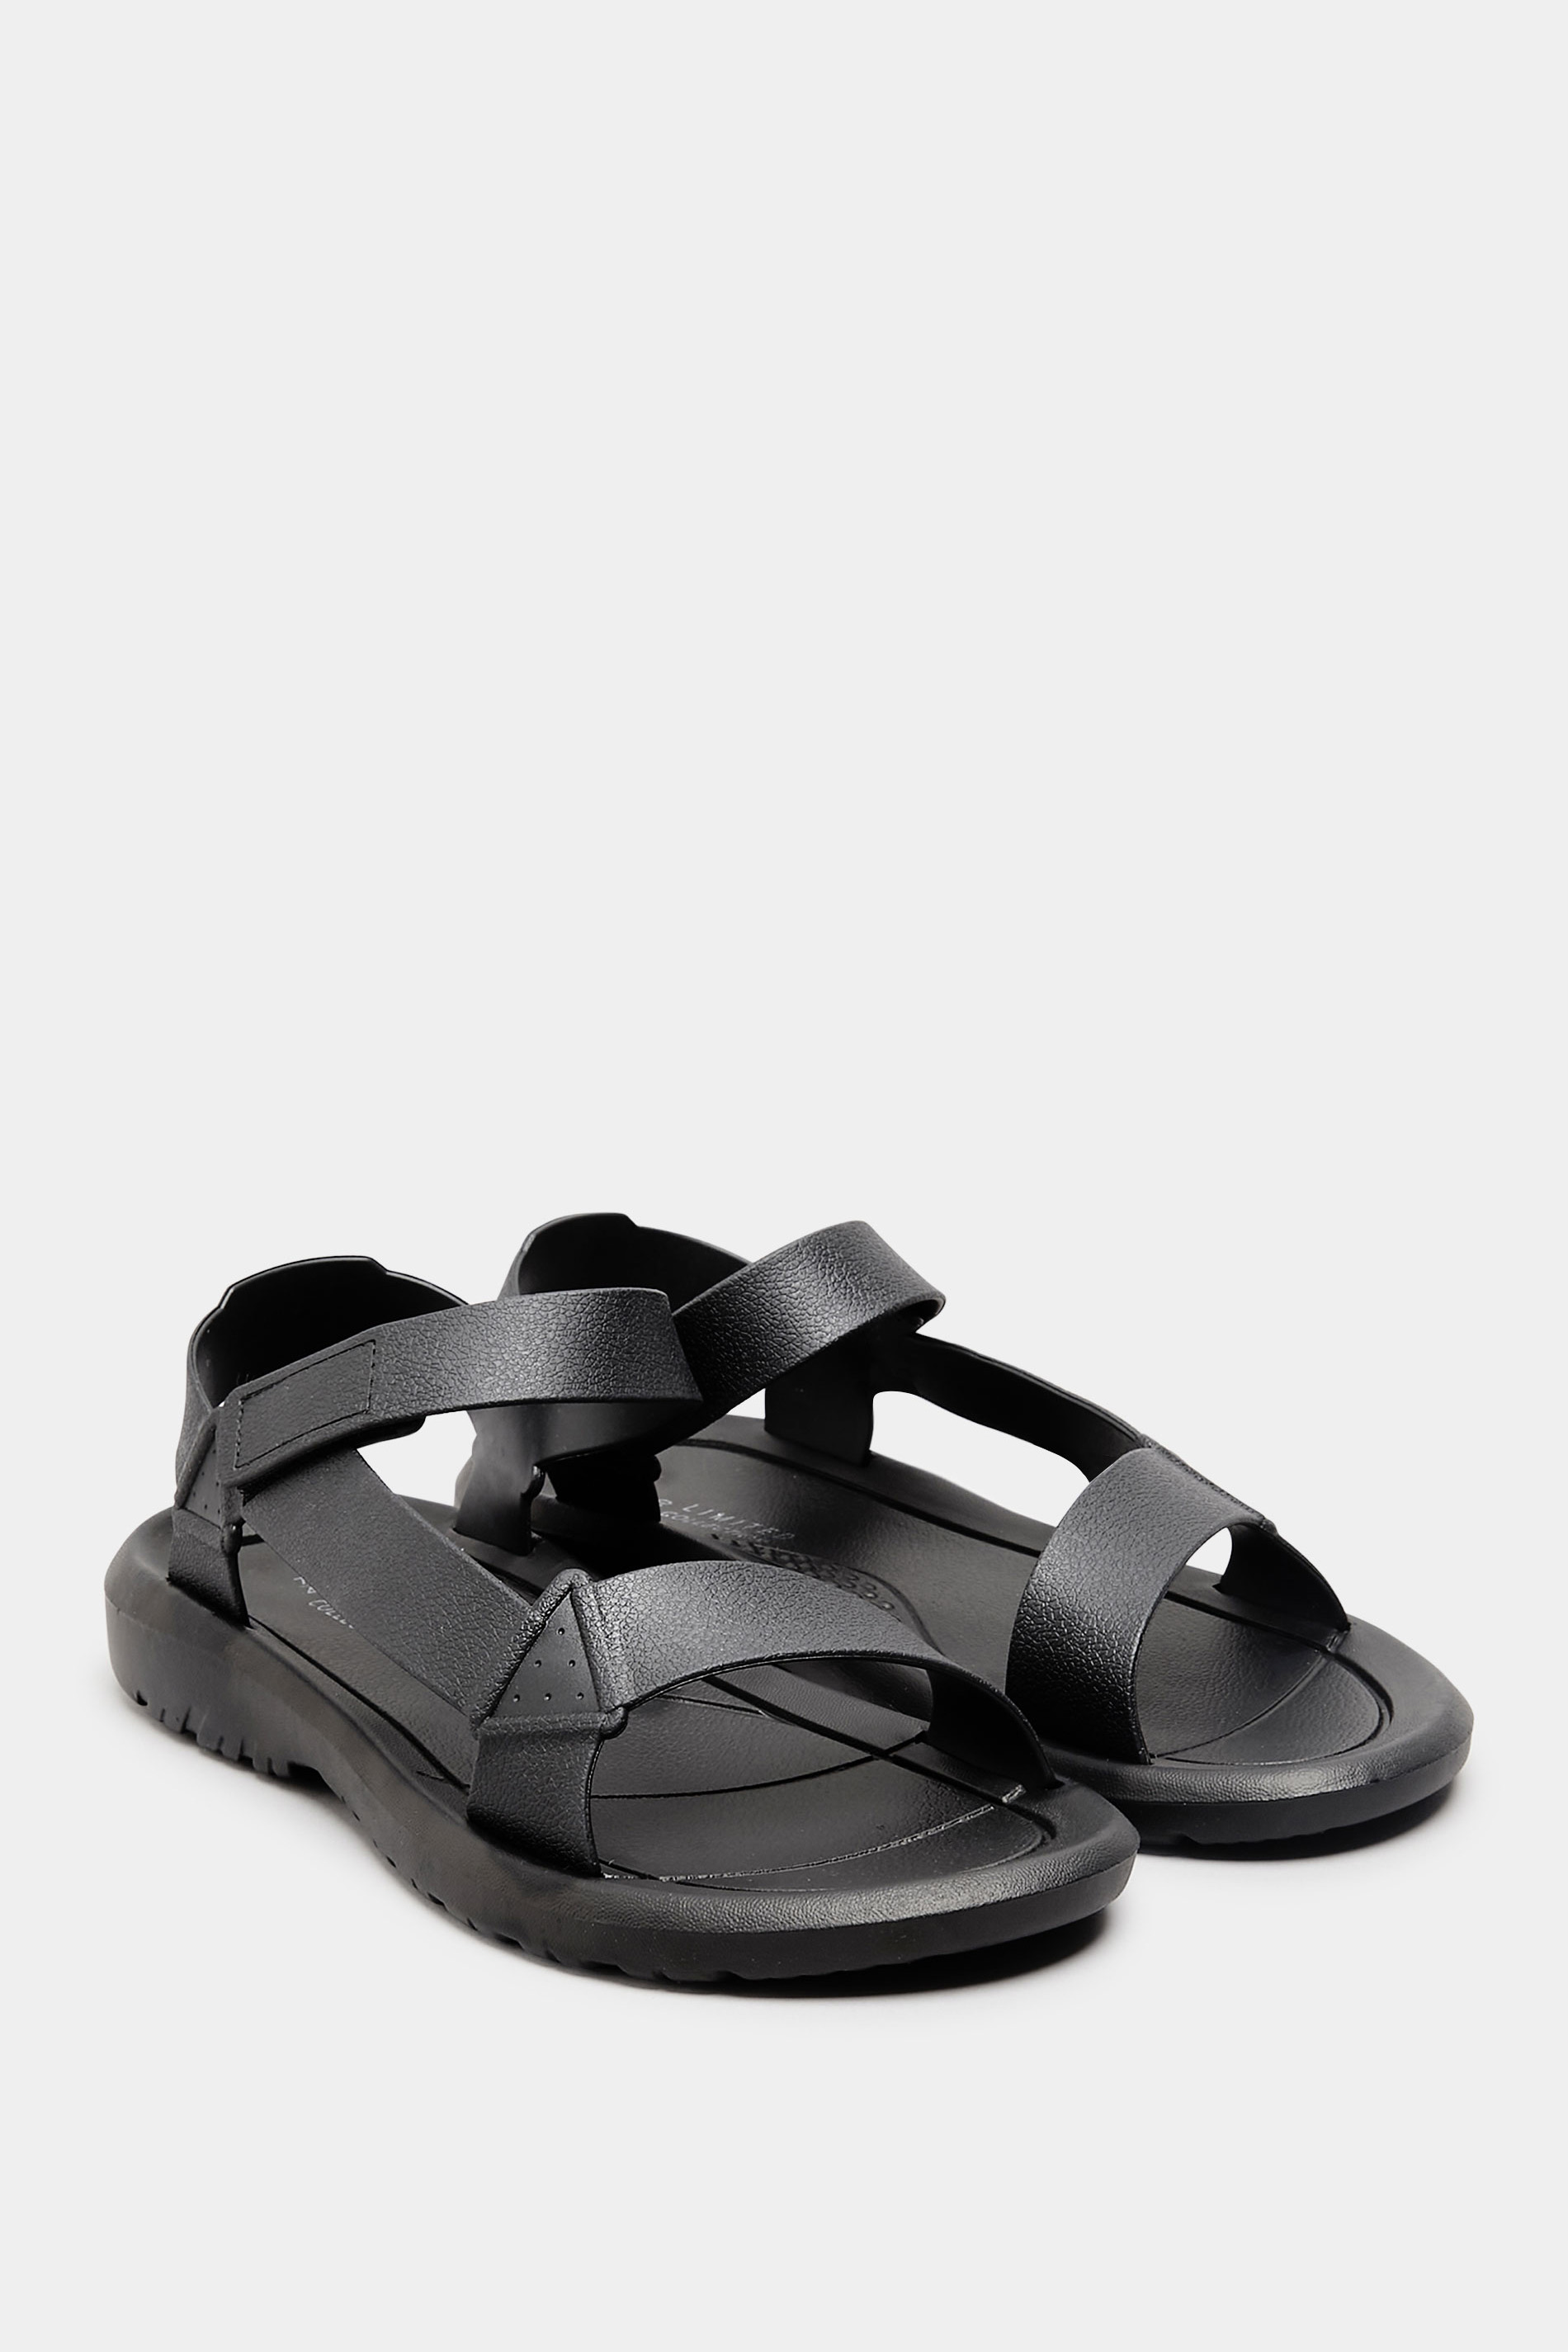 LIMITED COLLECTION Black Adjustable Strap Sandals In Wide E Fit | Yours ...